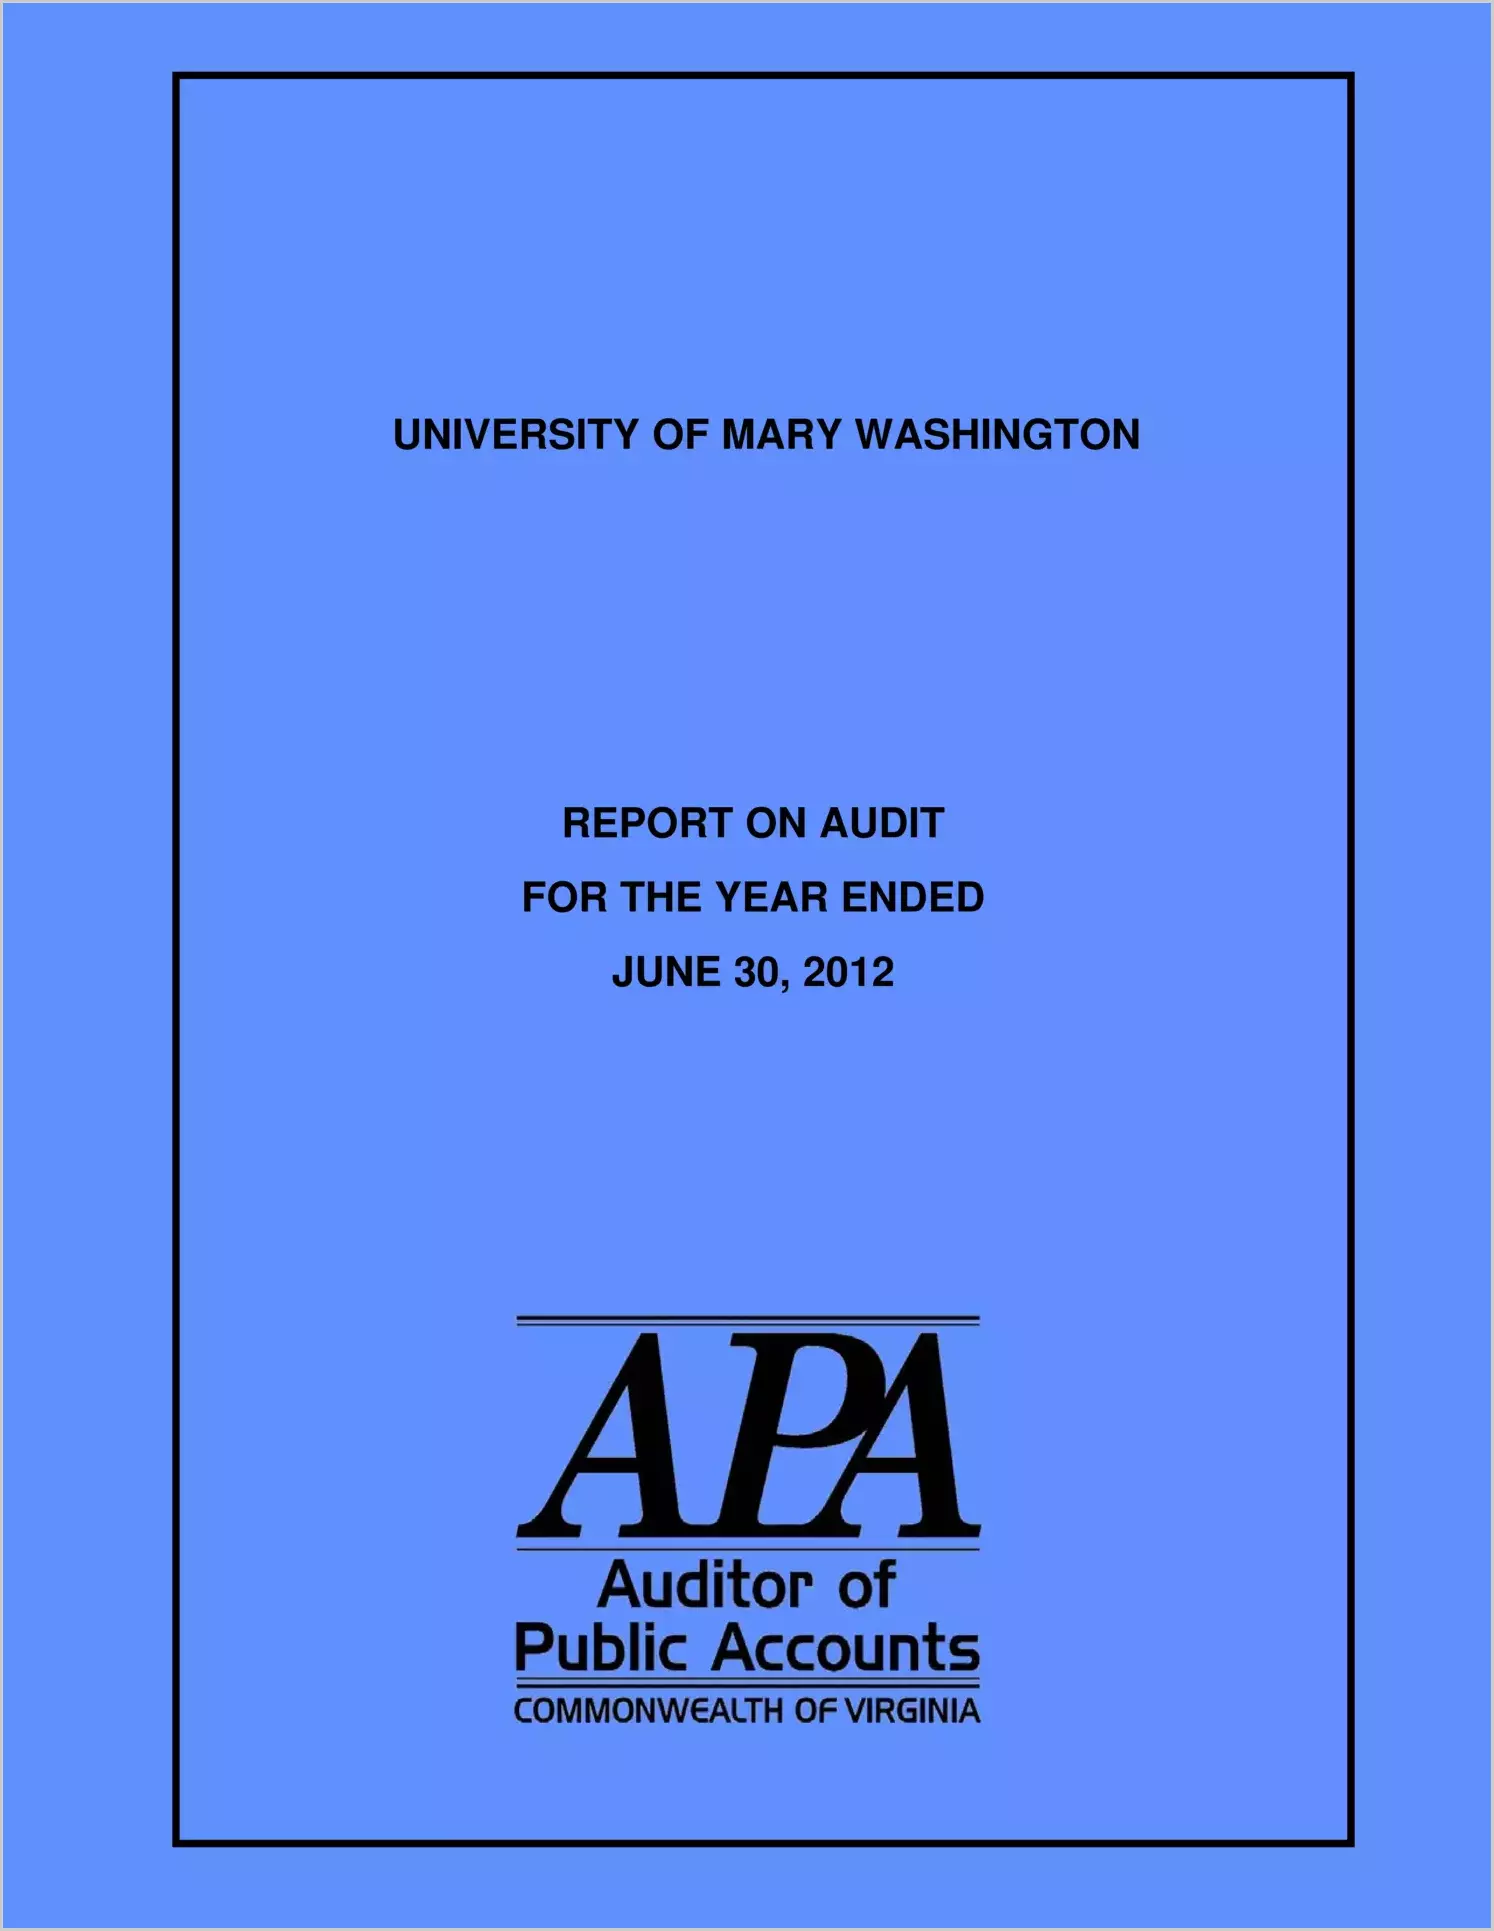 University of Mary Washington for the year ended June 30, 2012